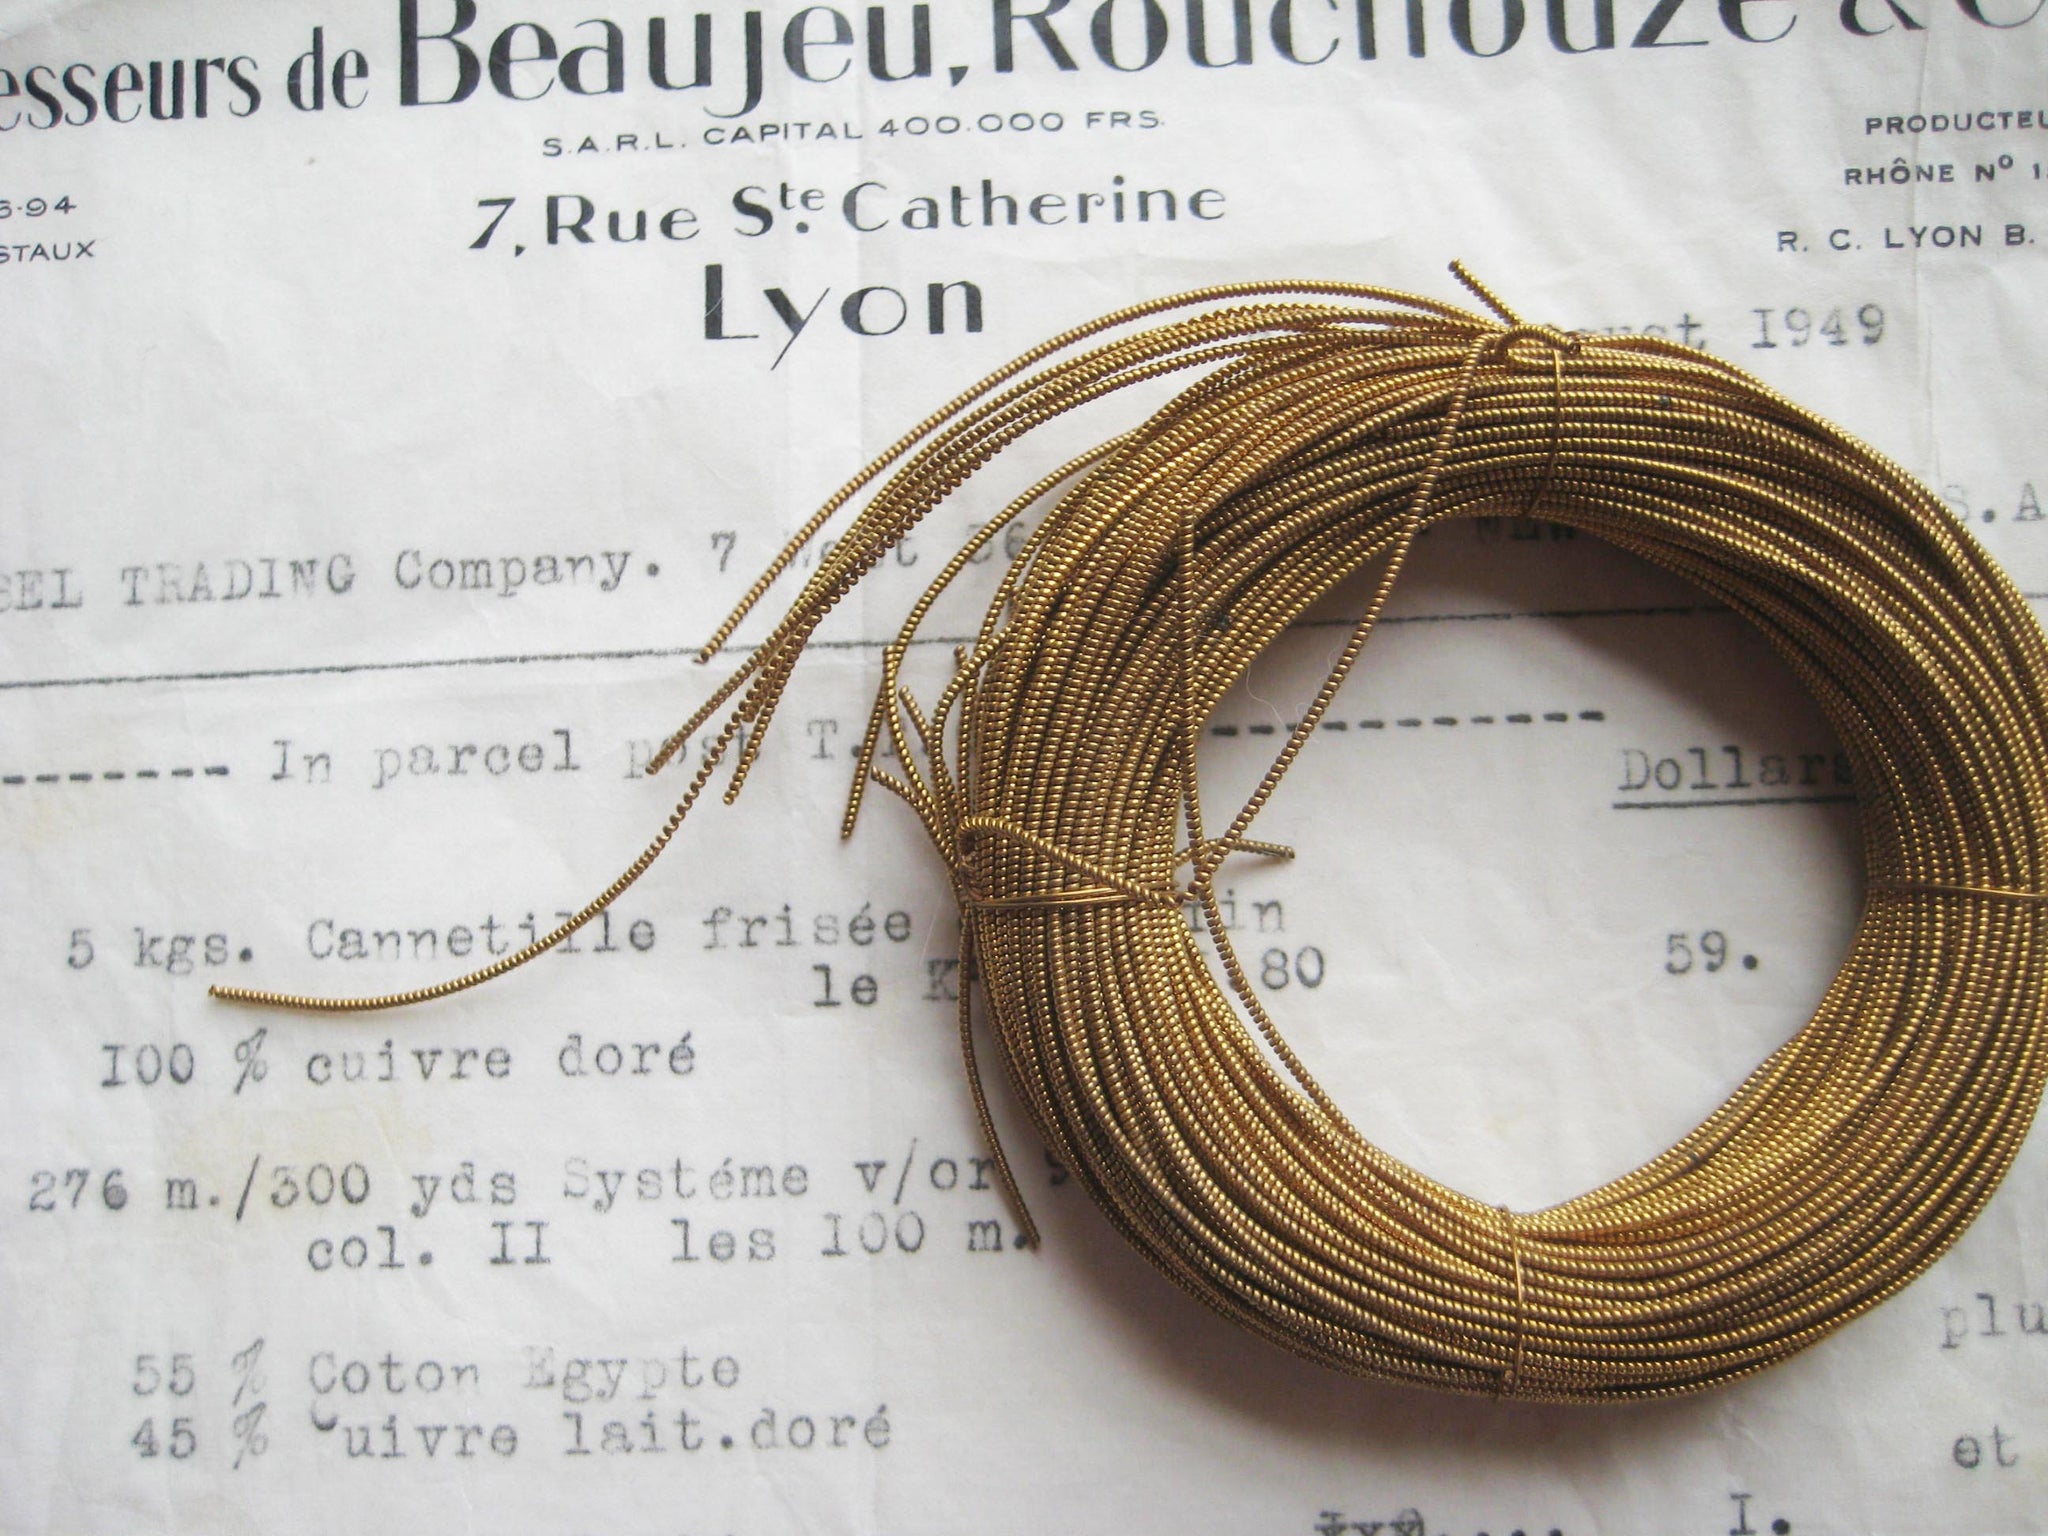 Roll of Gold Pearl Purl French Embroidery Bullion Thread